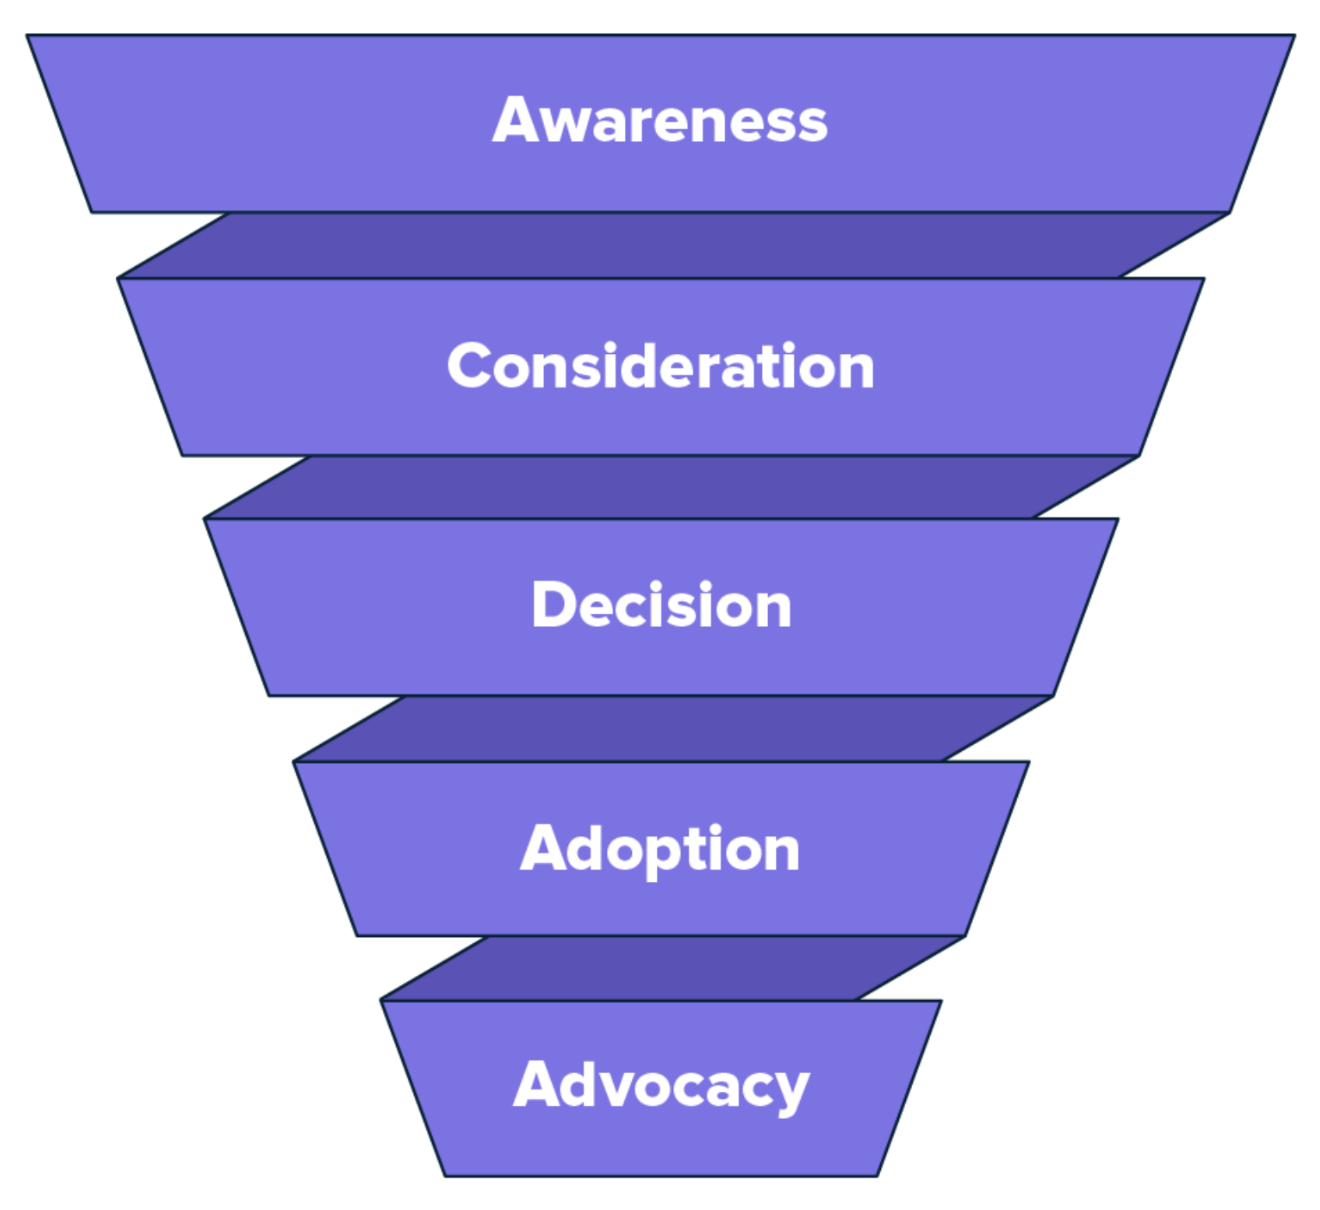 A social media funnel maps the customer journey from awareness at the top of funnel down to advocacy at the bottom of the funnel.